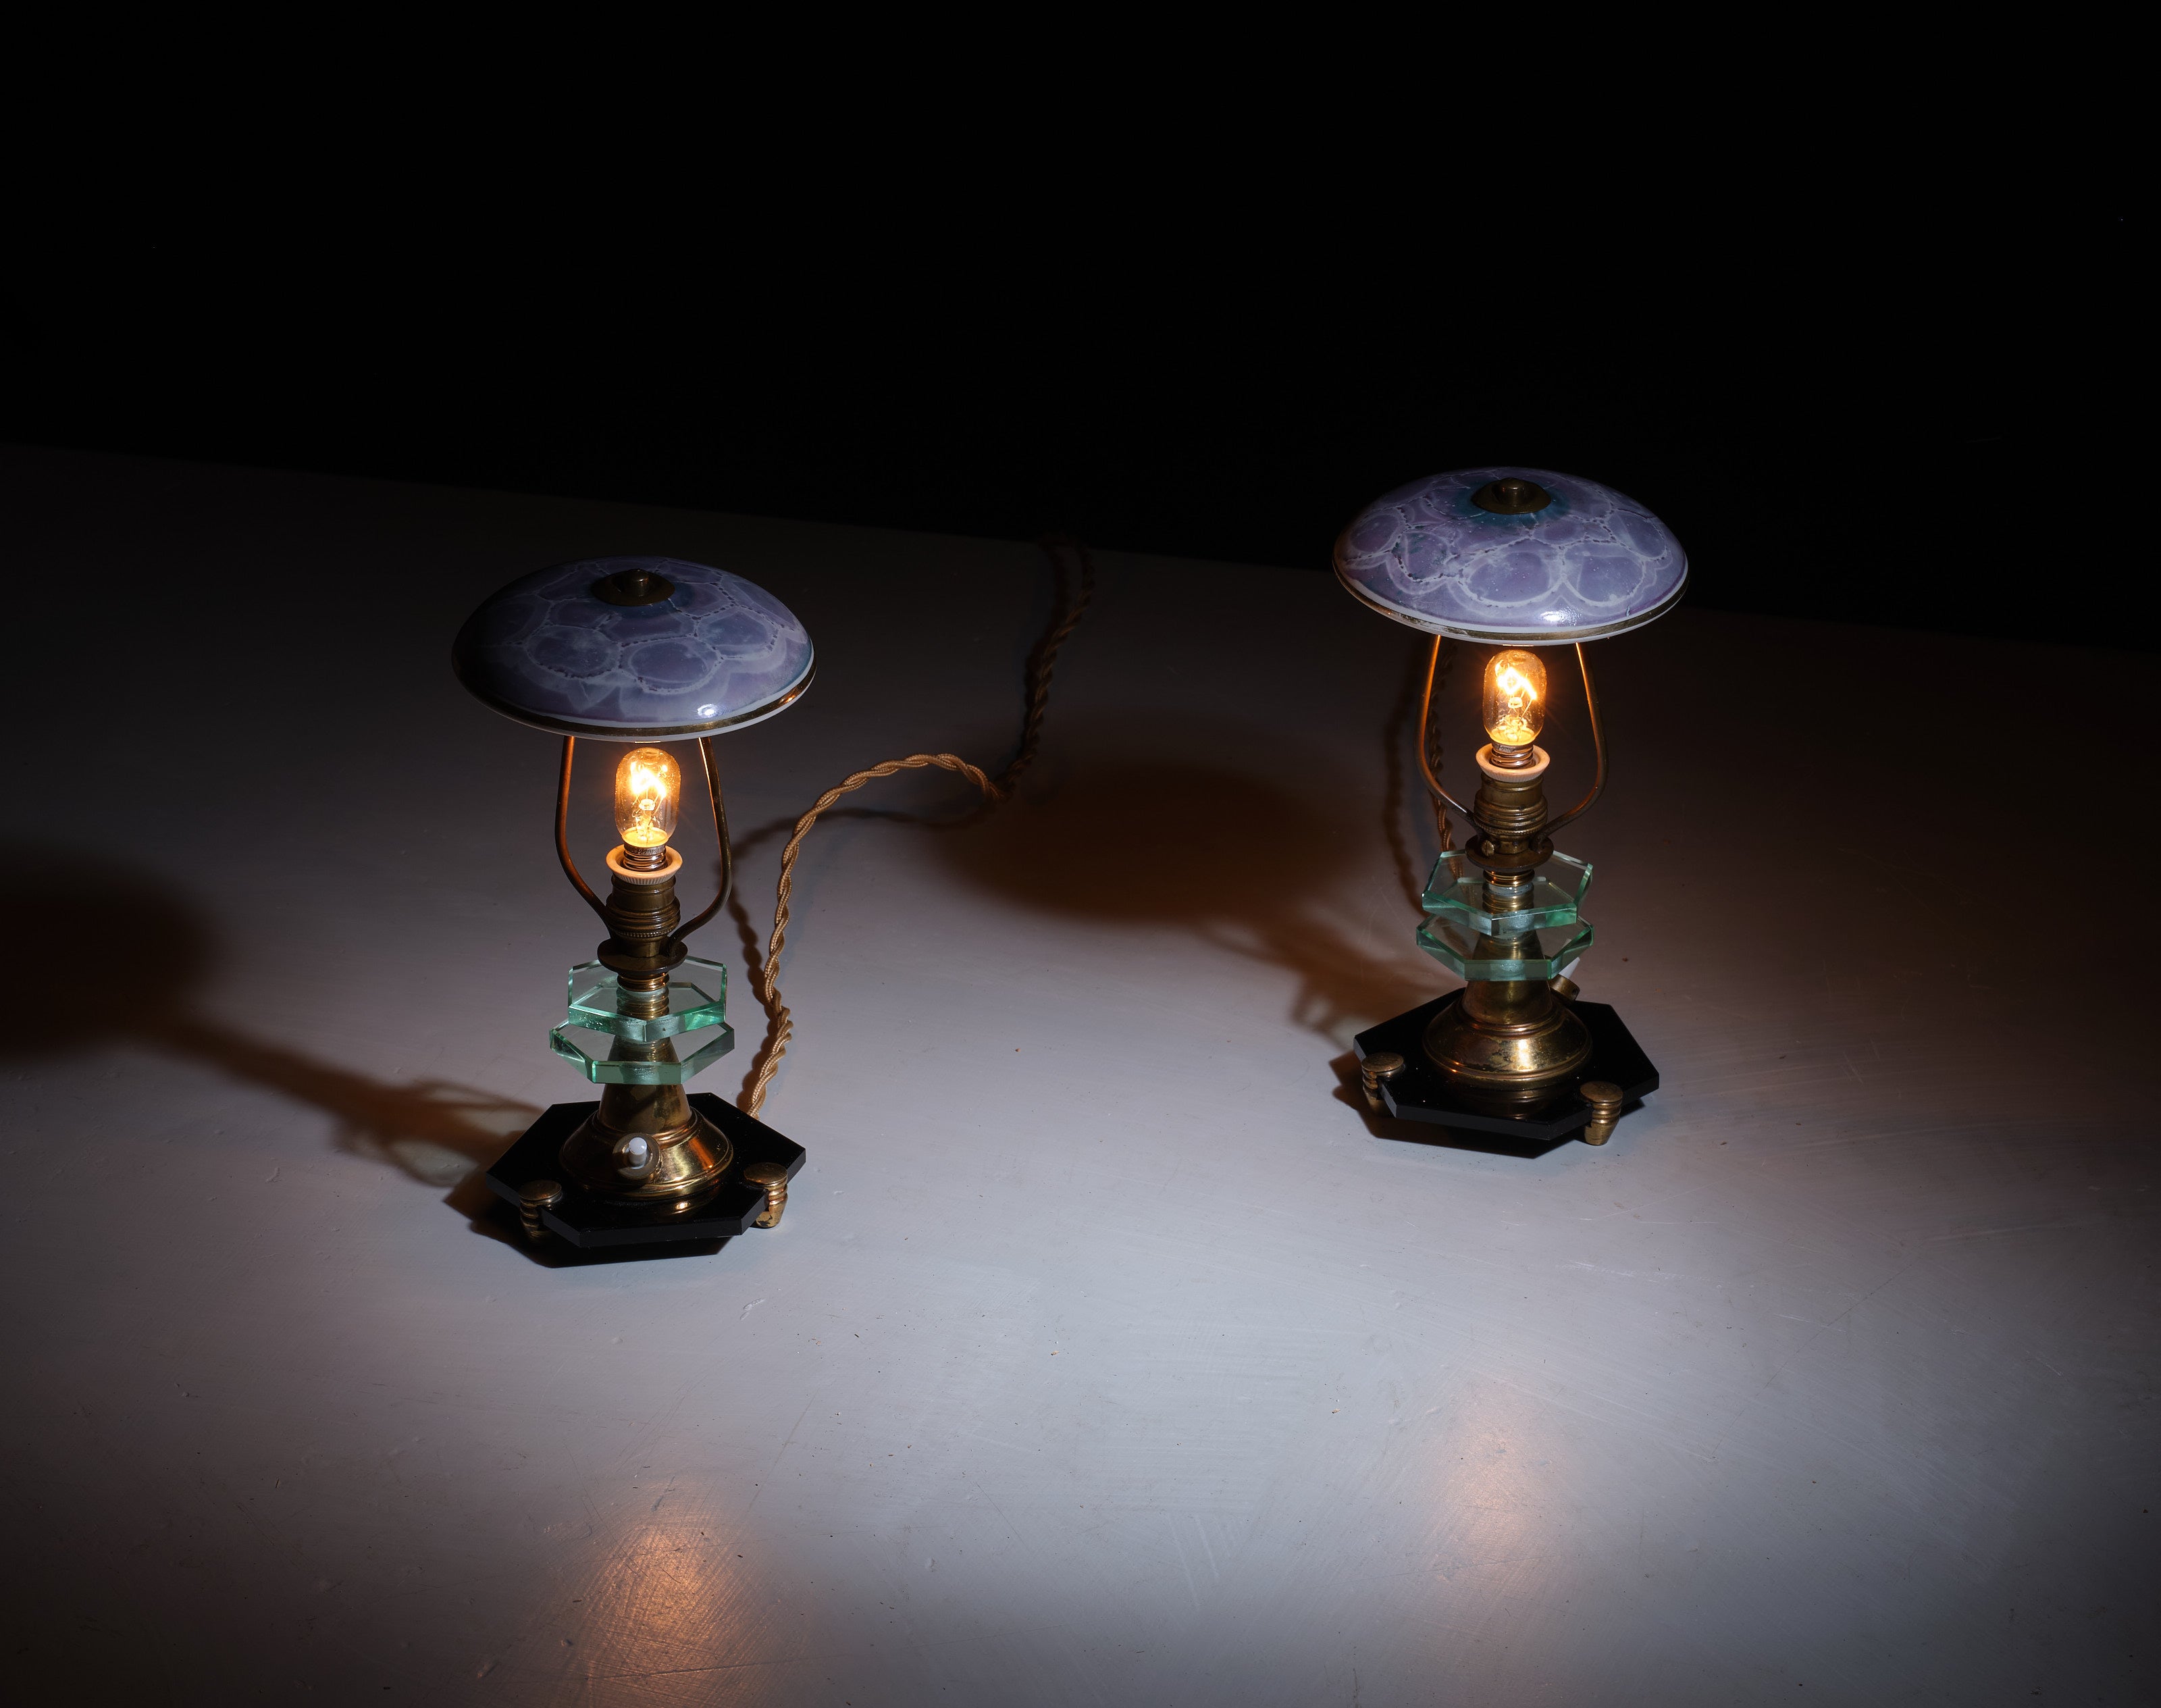 Elevate your decor with this exquisite pair of 1950s Italian table lamps. Designed and crafted in Italy, these lamps are a stunning representation of mid-century production and design. The lamps feature meticulous attention to detail, with brass